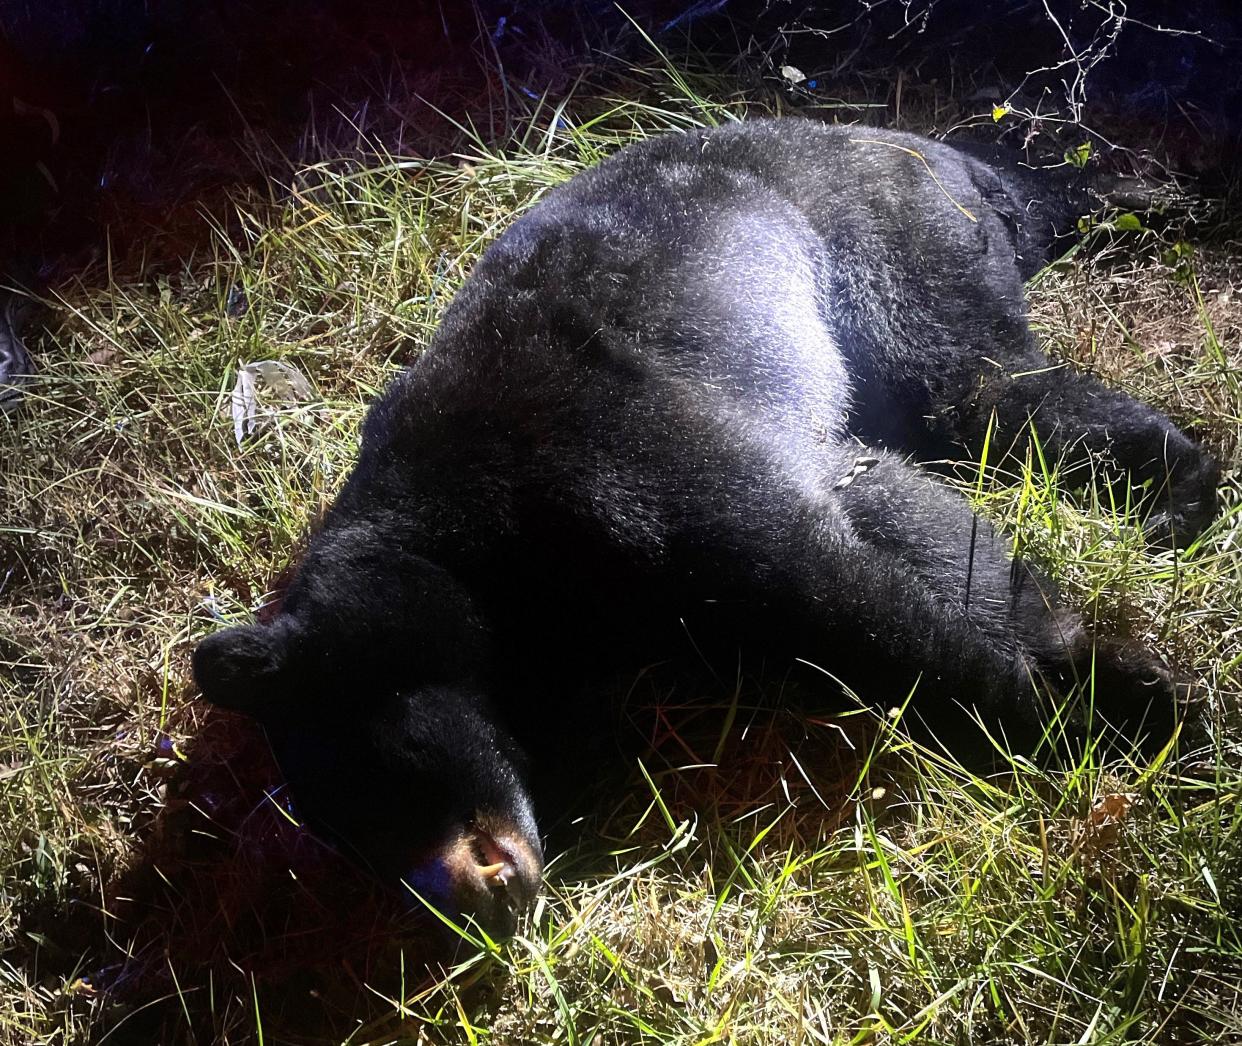 This black bear, which state wildlife officials estimated to weigh more than 300 pounds, was hit and killed by an automobile in Bedford County in November.